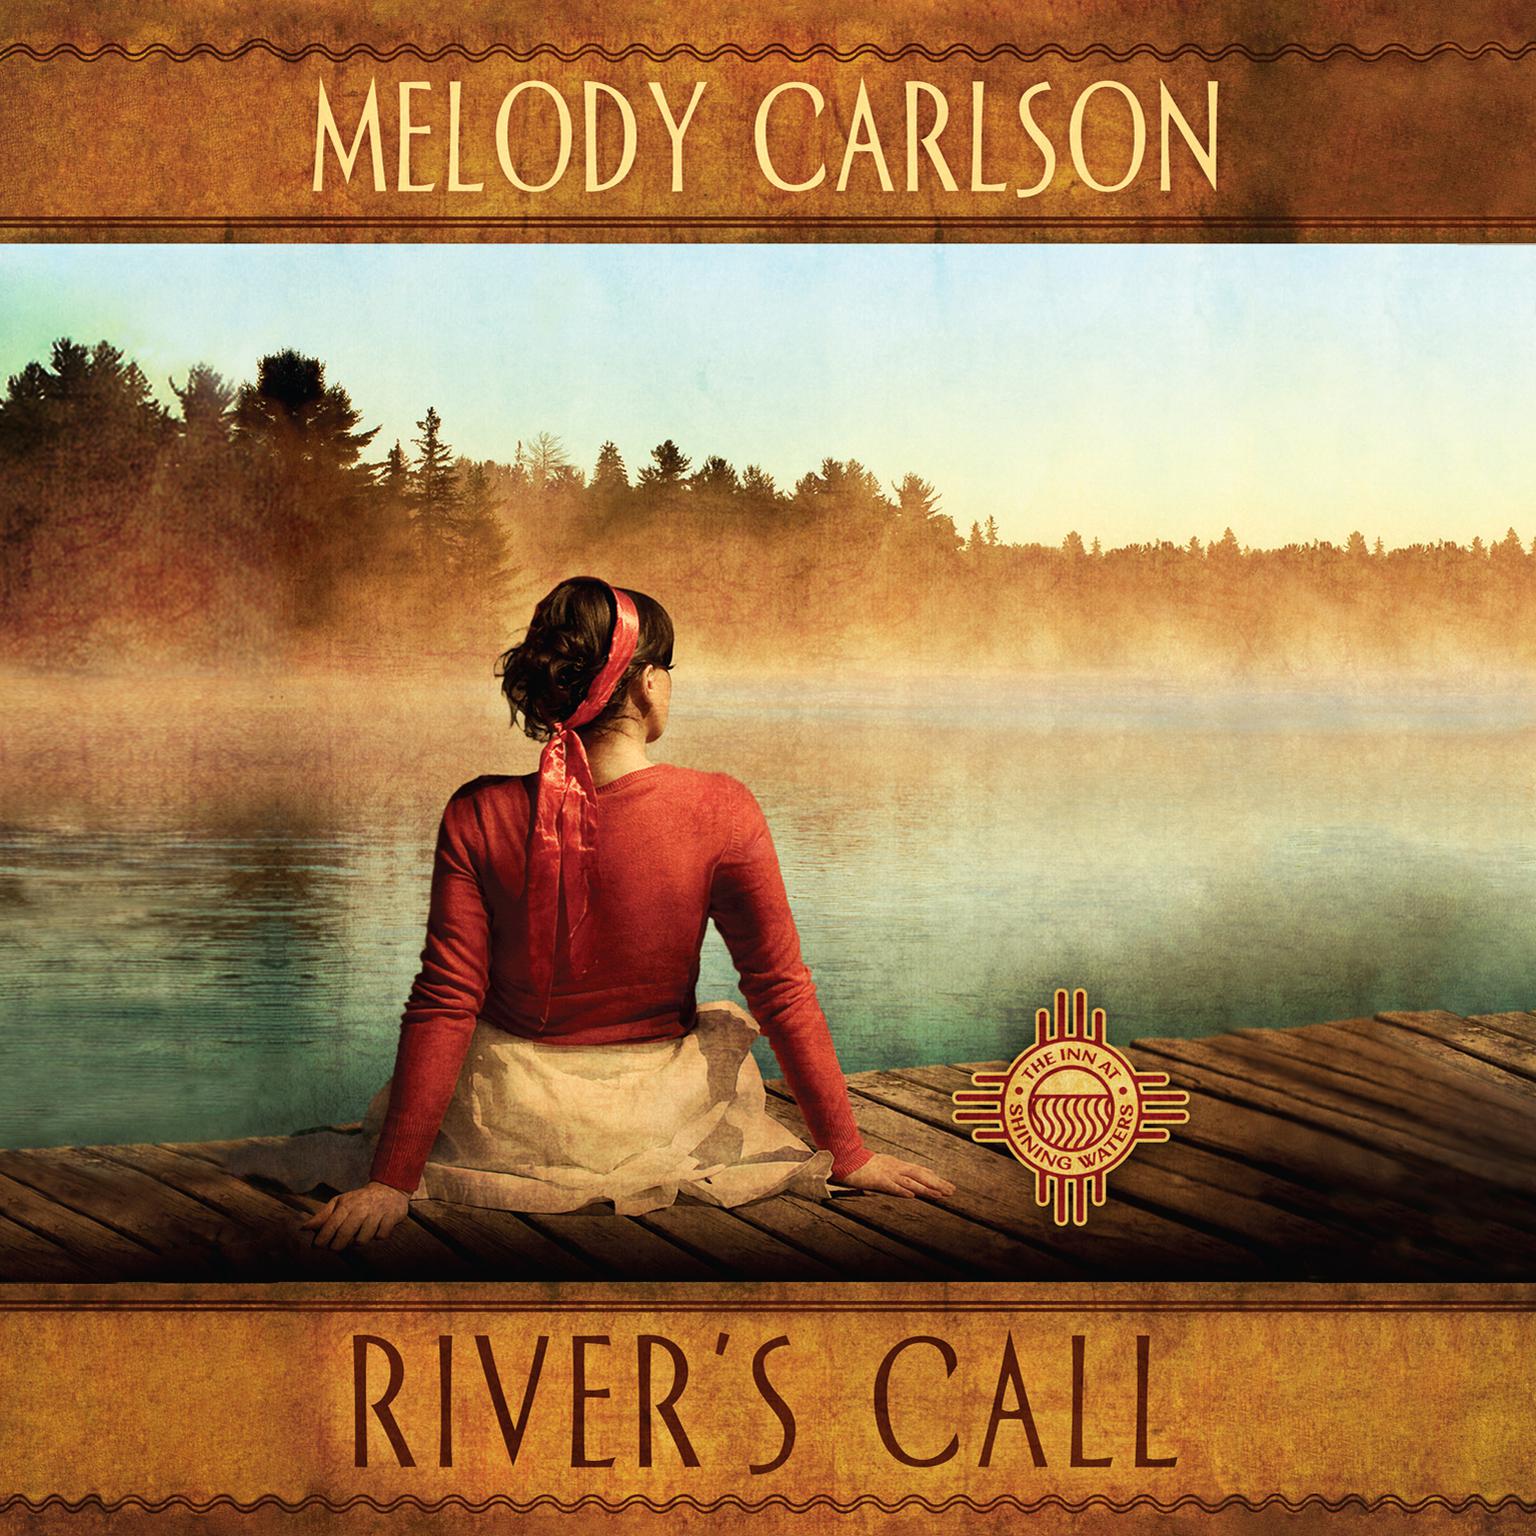 Rivers Call Audiobook, by Melody Carlson